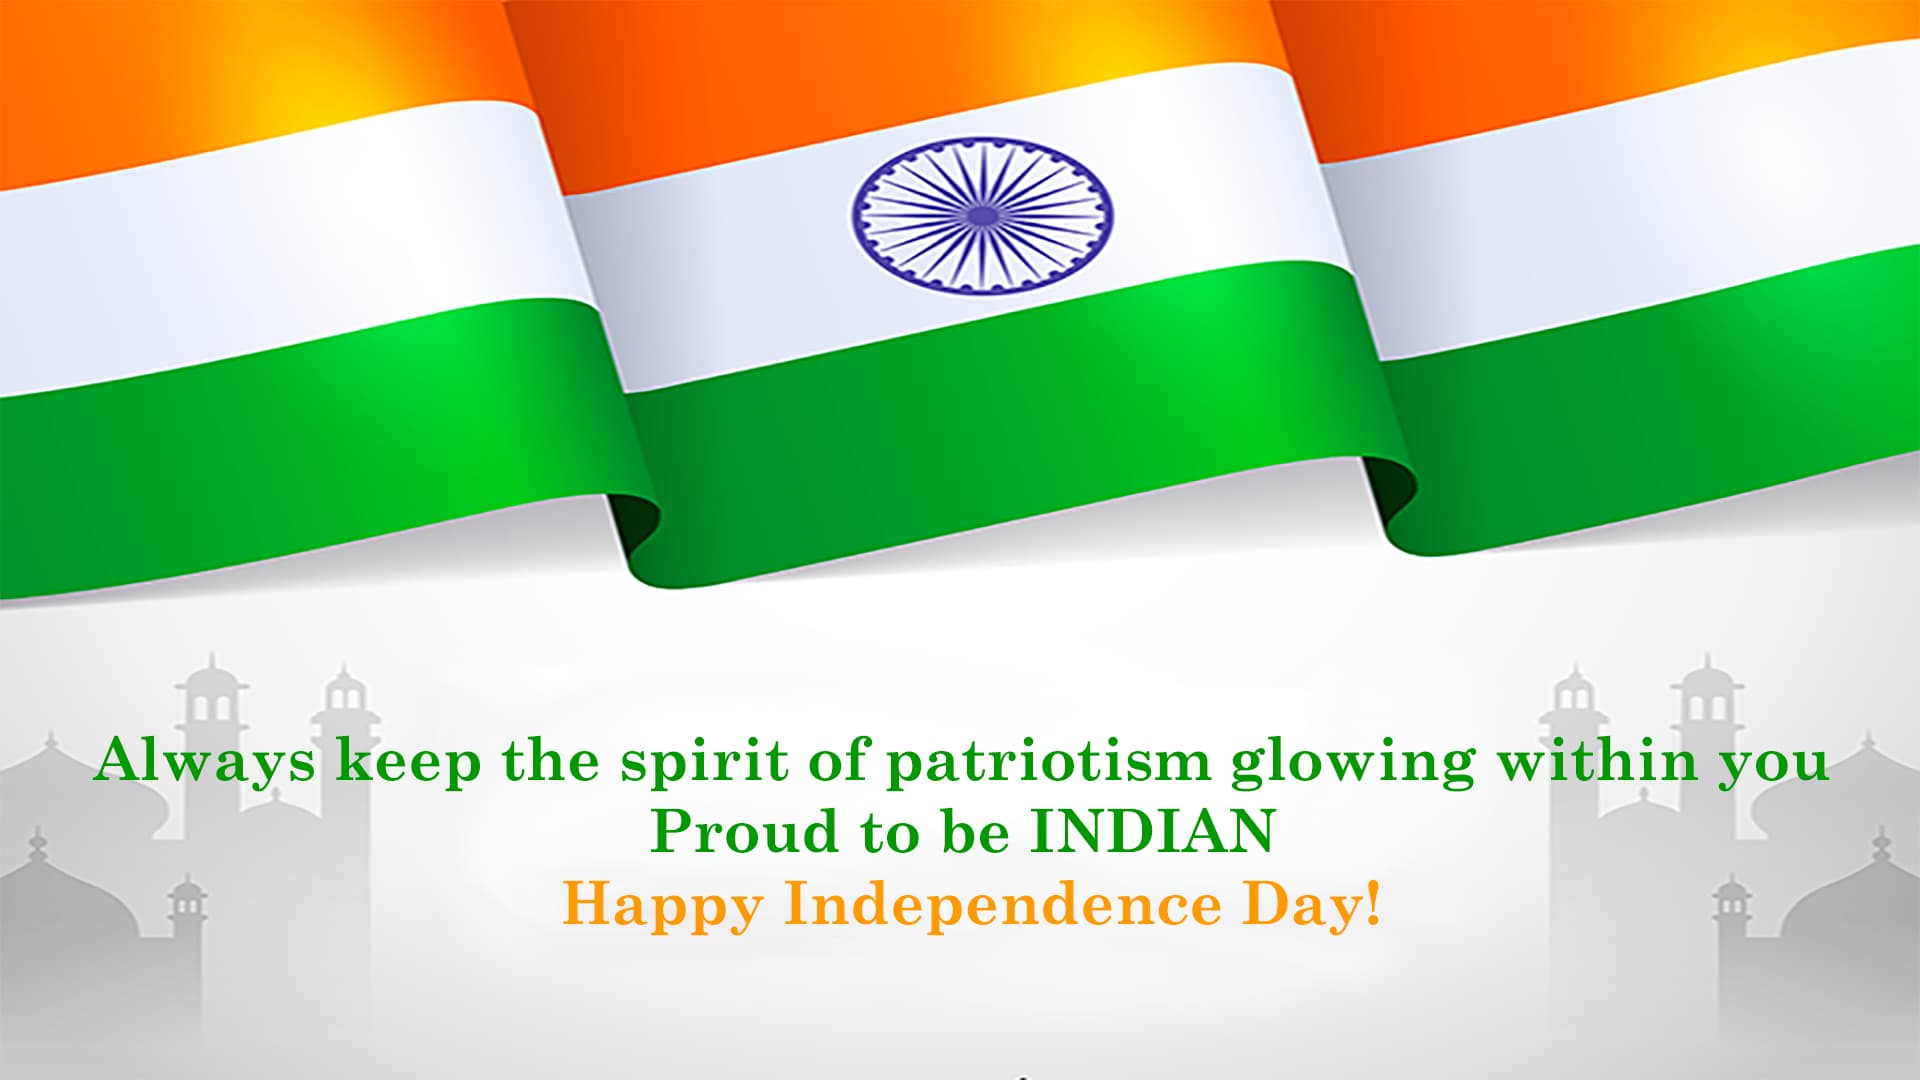 Happy Independence Day Indian Whatsapp Messages - Happy Independence Day  2019 - 1920x1080 Wallpaper 